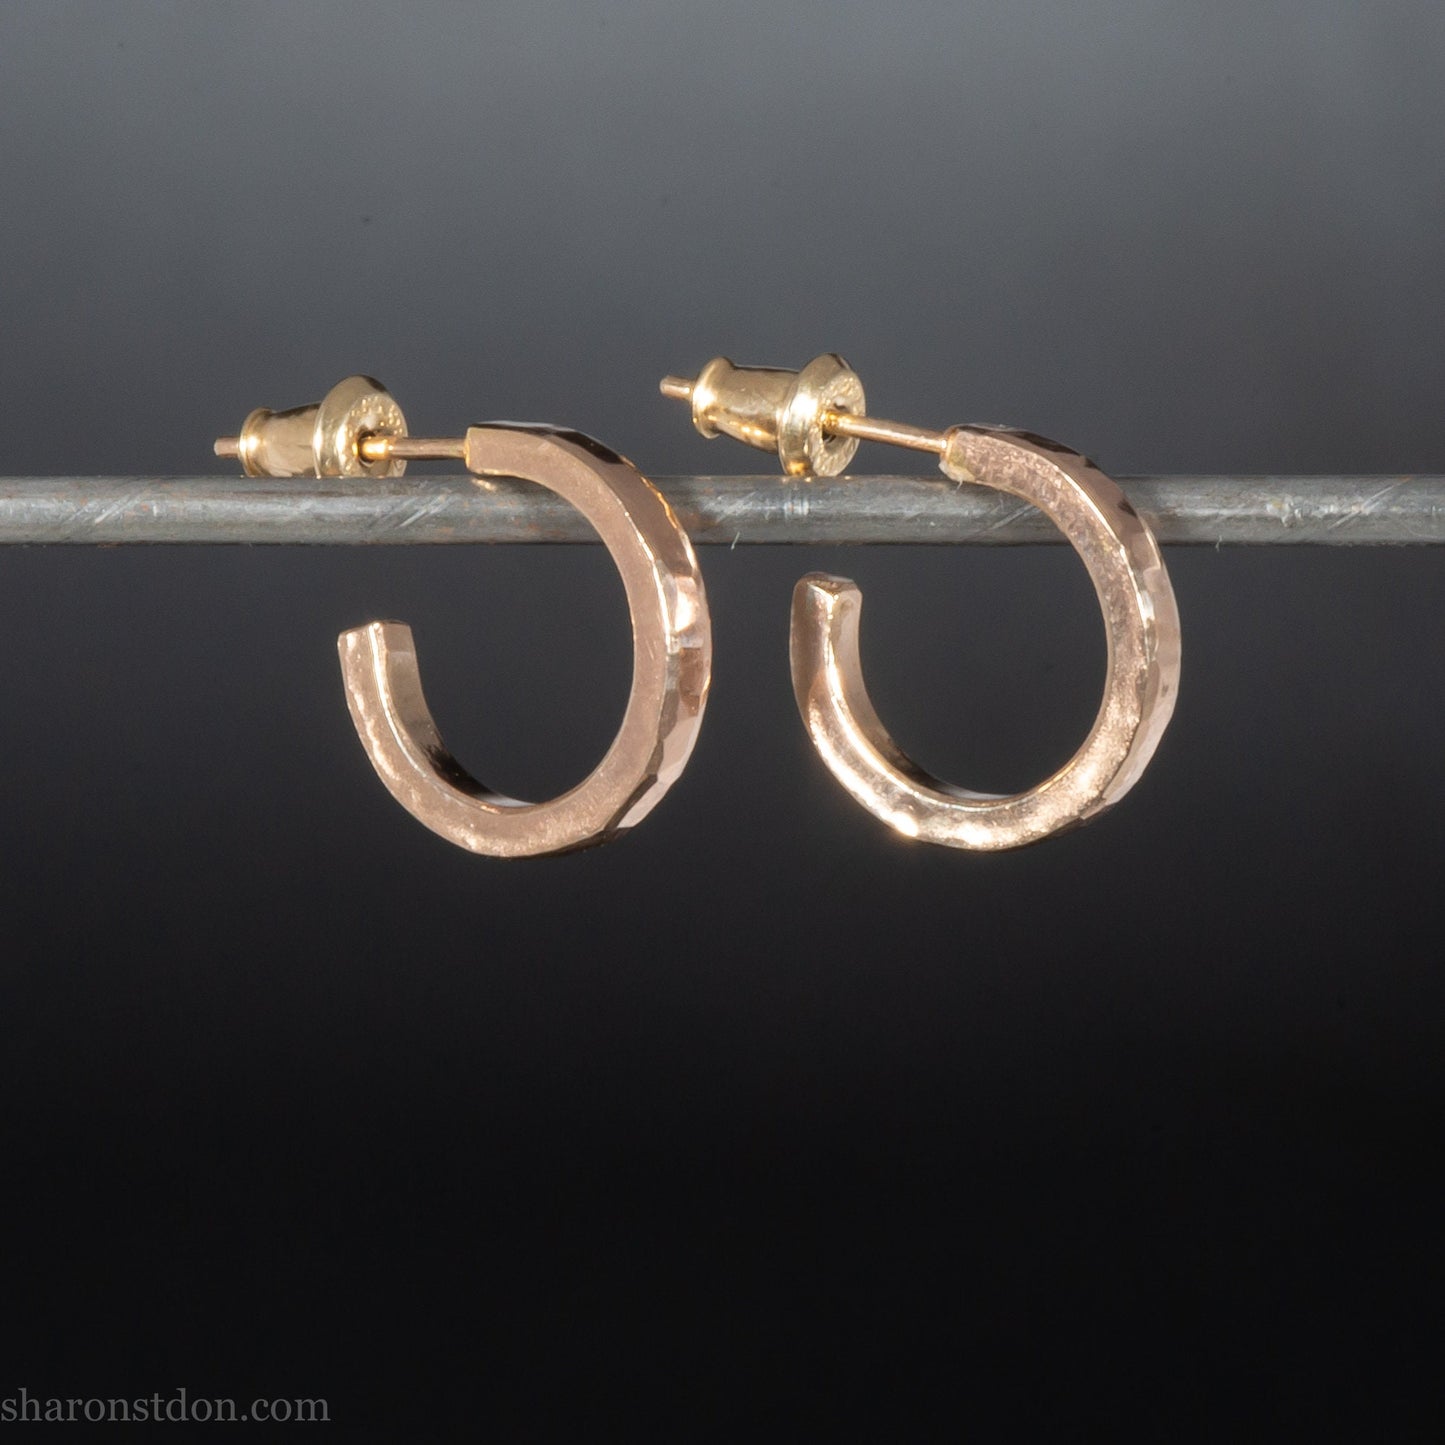 Gold hoop earrings set handmade in North America by Sharon SaintDon. Solid 14k yellow gold, 14mm diameter round with hammered texture.